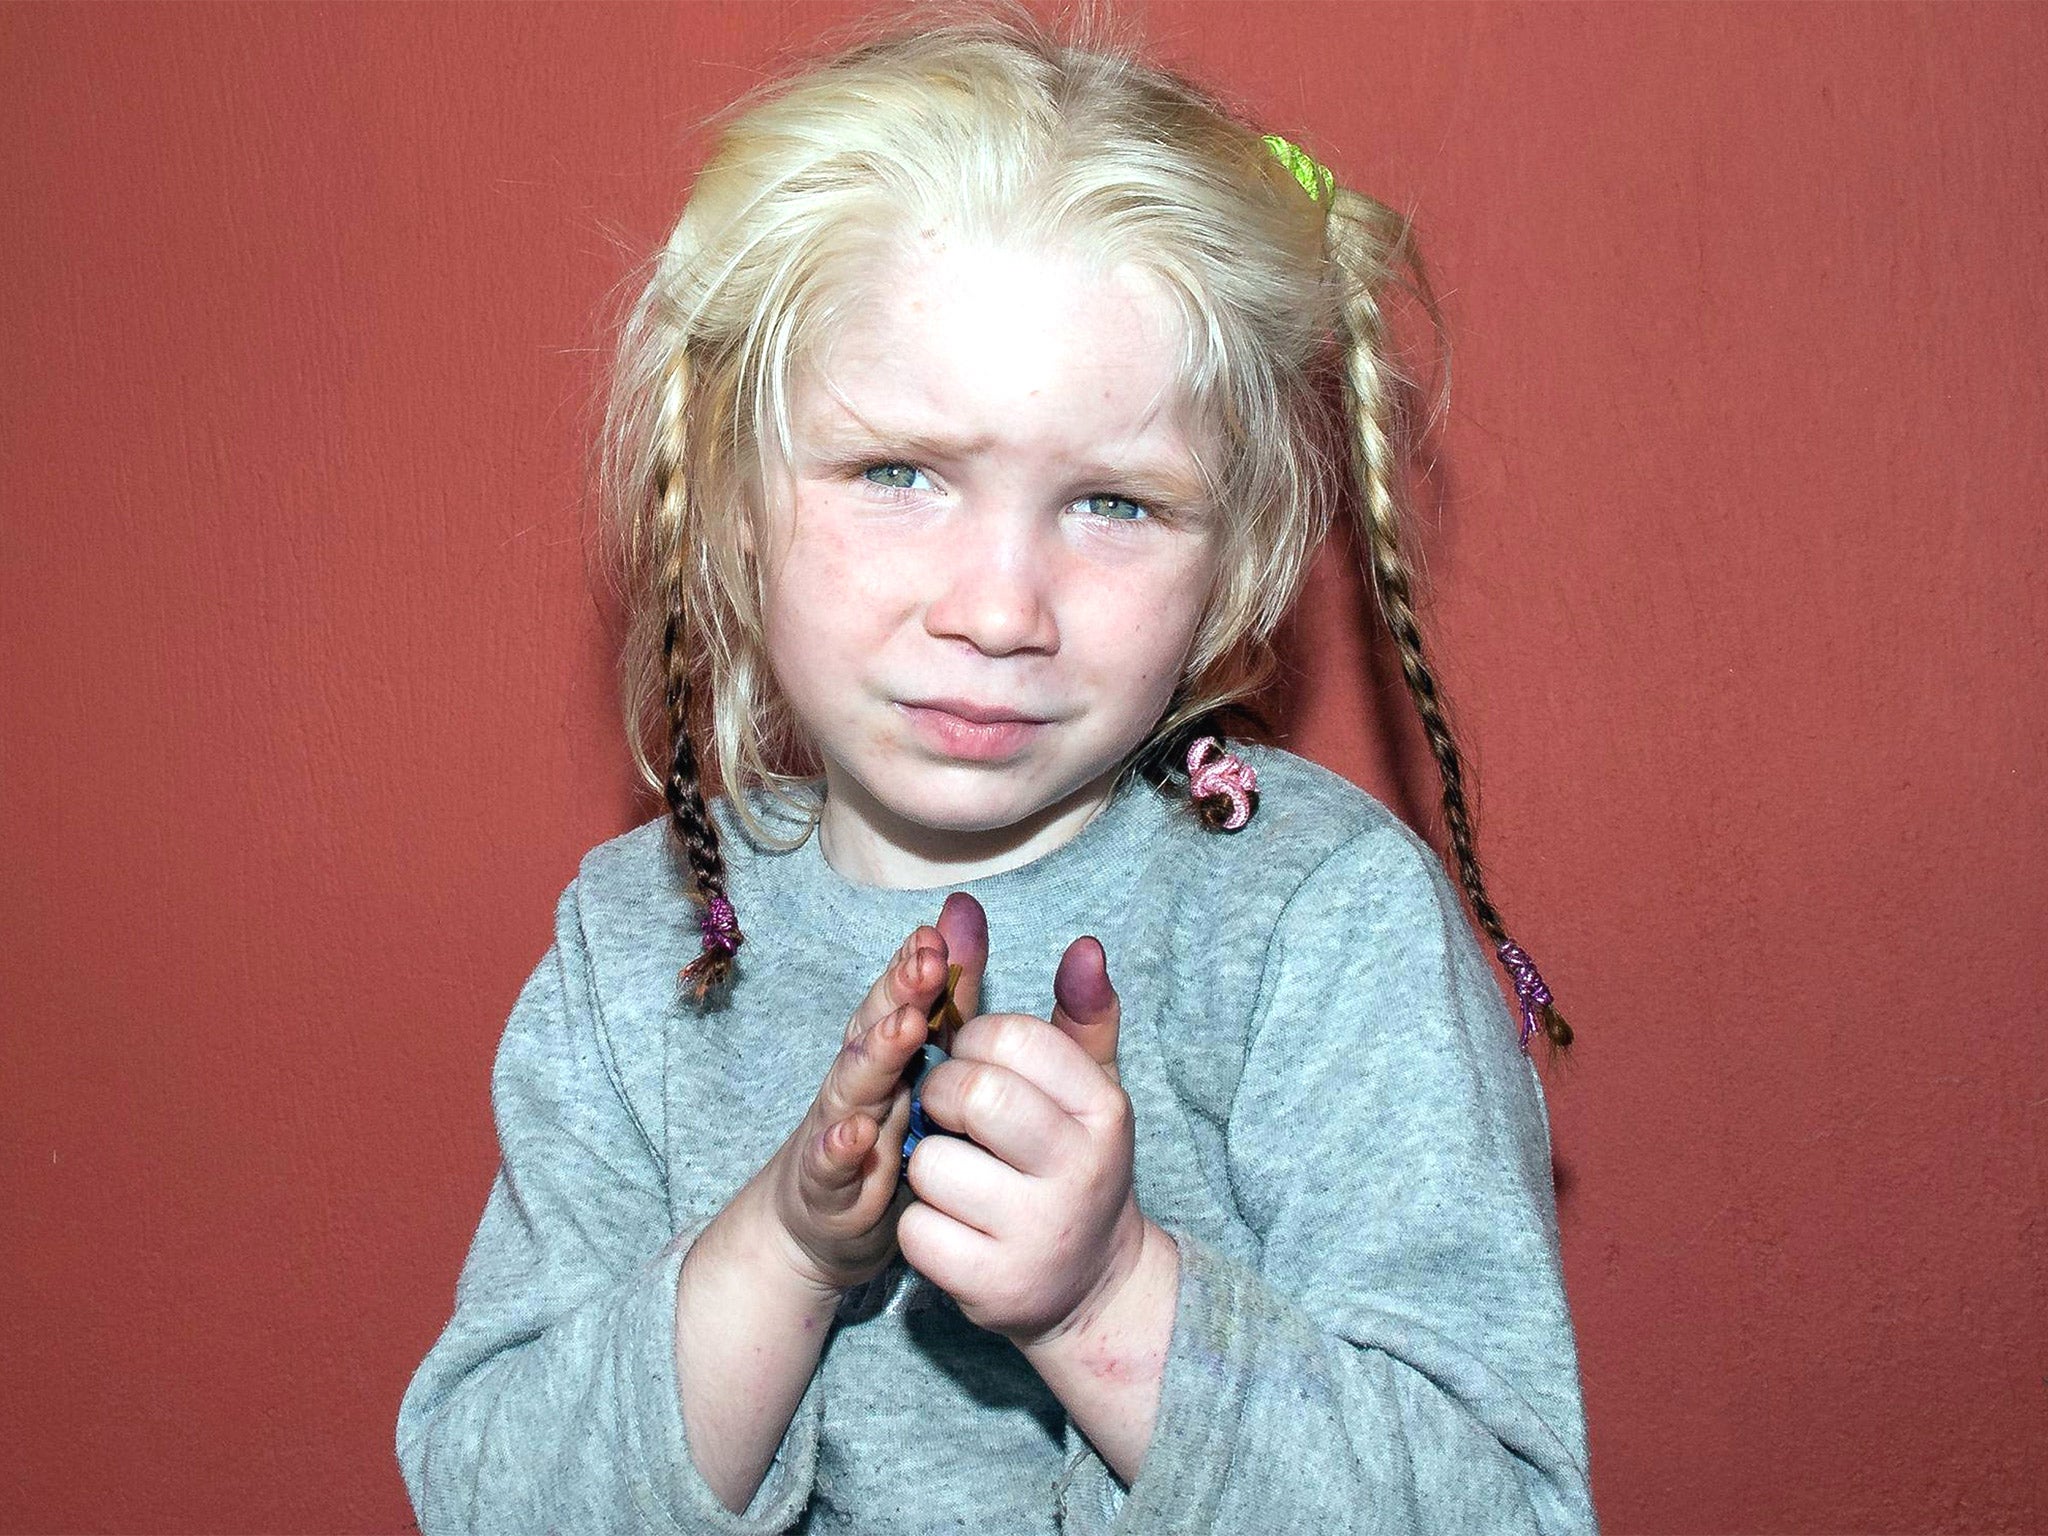 Maria, five, is not being allowed to see her Roma ‘parents’; the Bulgarian authorities are trying to repatriate her